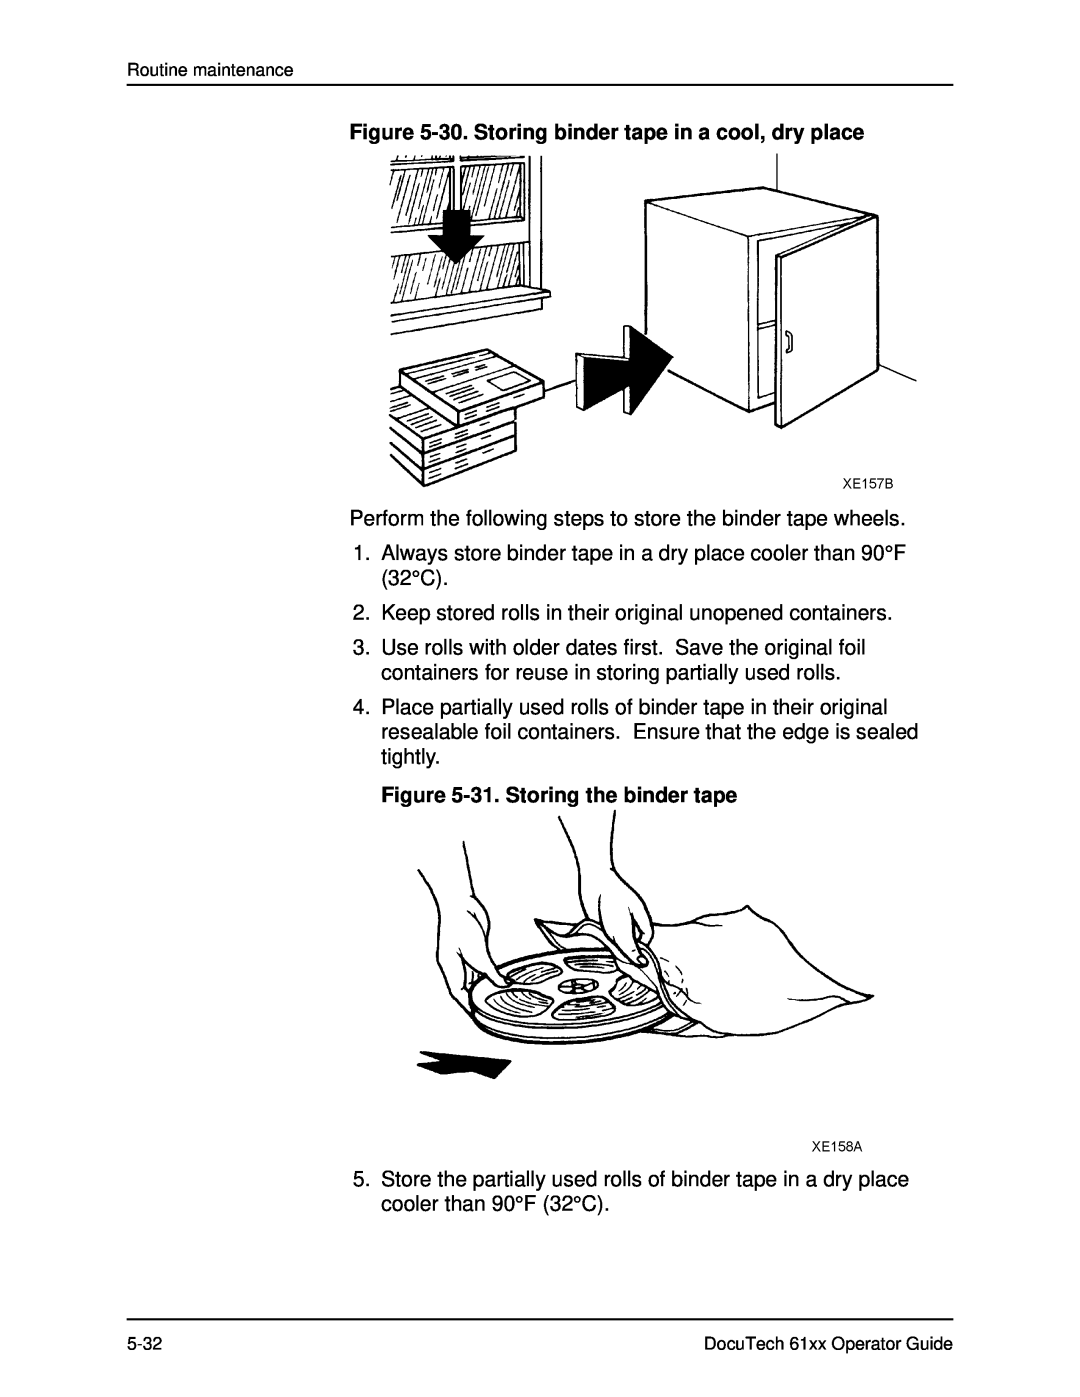 Xerox 61xx manual 30. Storing binder tape in a cool, dry place, 31. Storing the binder tape 